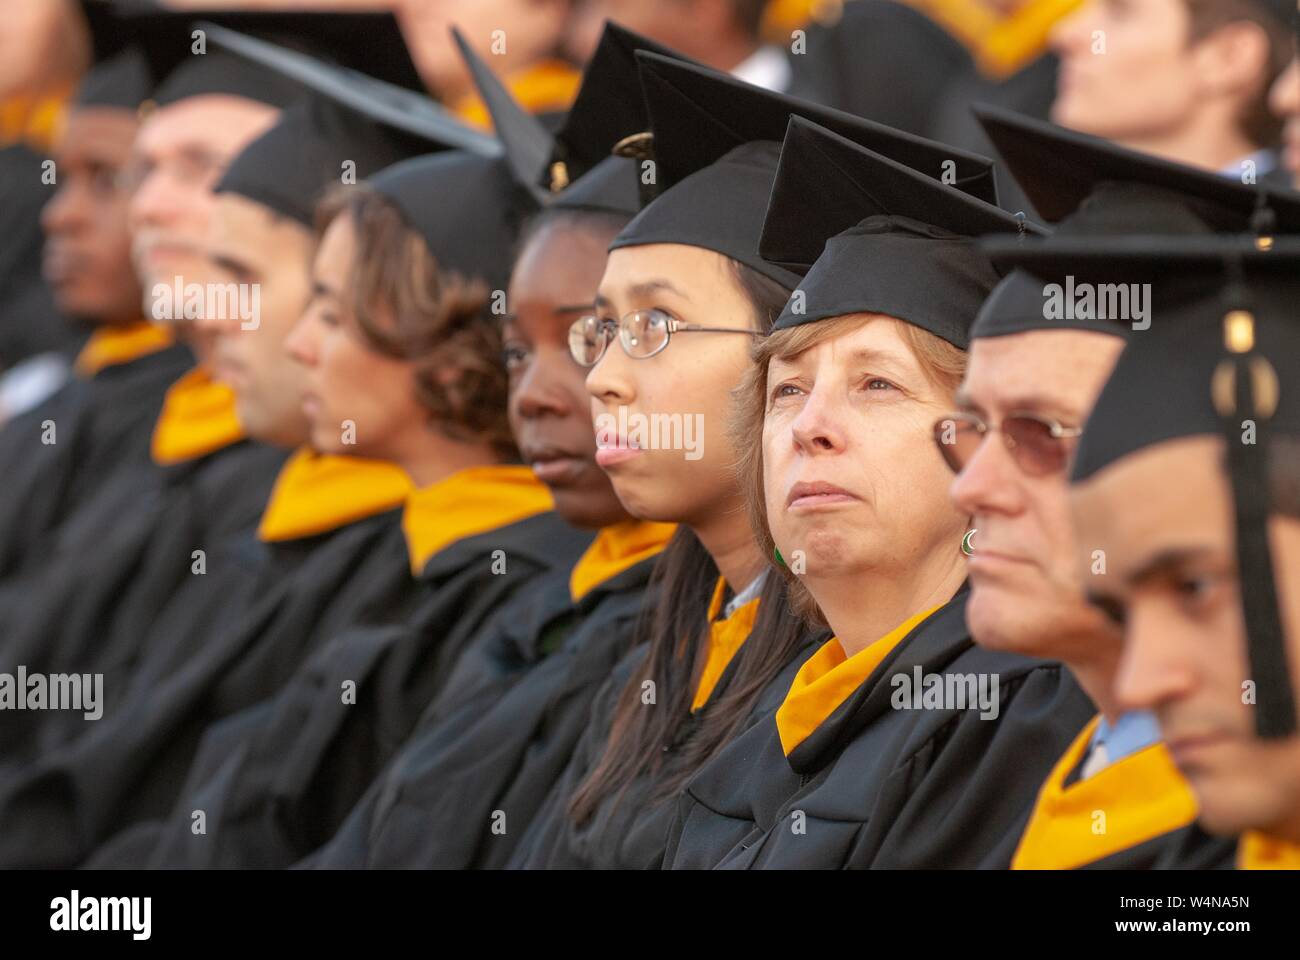 Engineering graduands, wearing caps and gowns, sit in a row during a